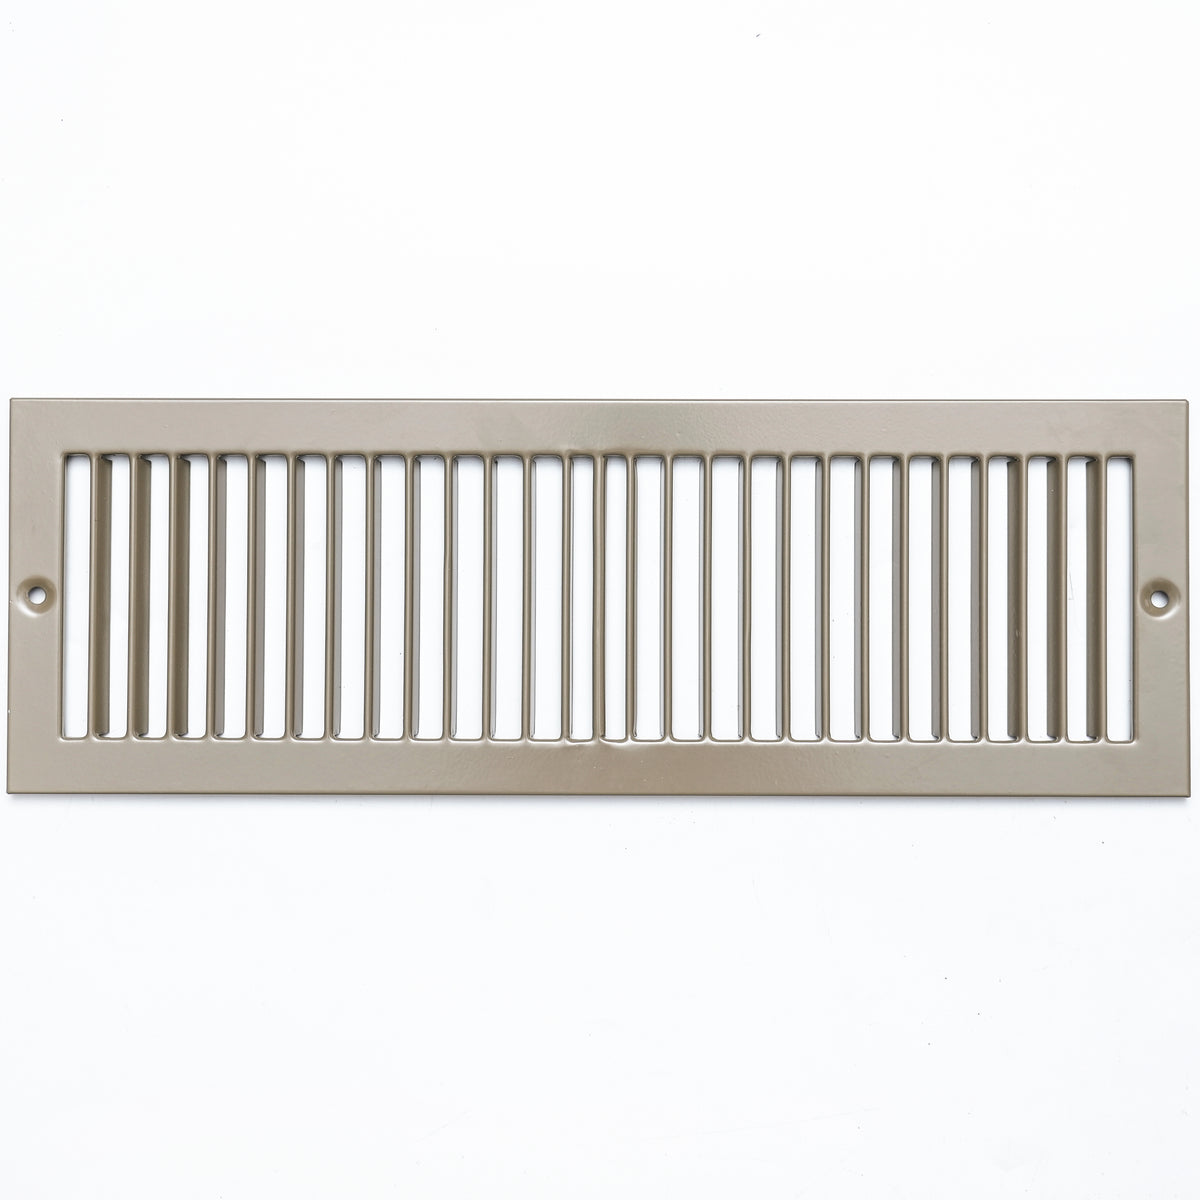 airgrilles 4" x 14" toe kick register grille vent cover outer dimensions: 5.5" x 15.5" brown hnd-tgs-br-4x14  1